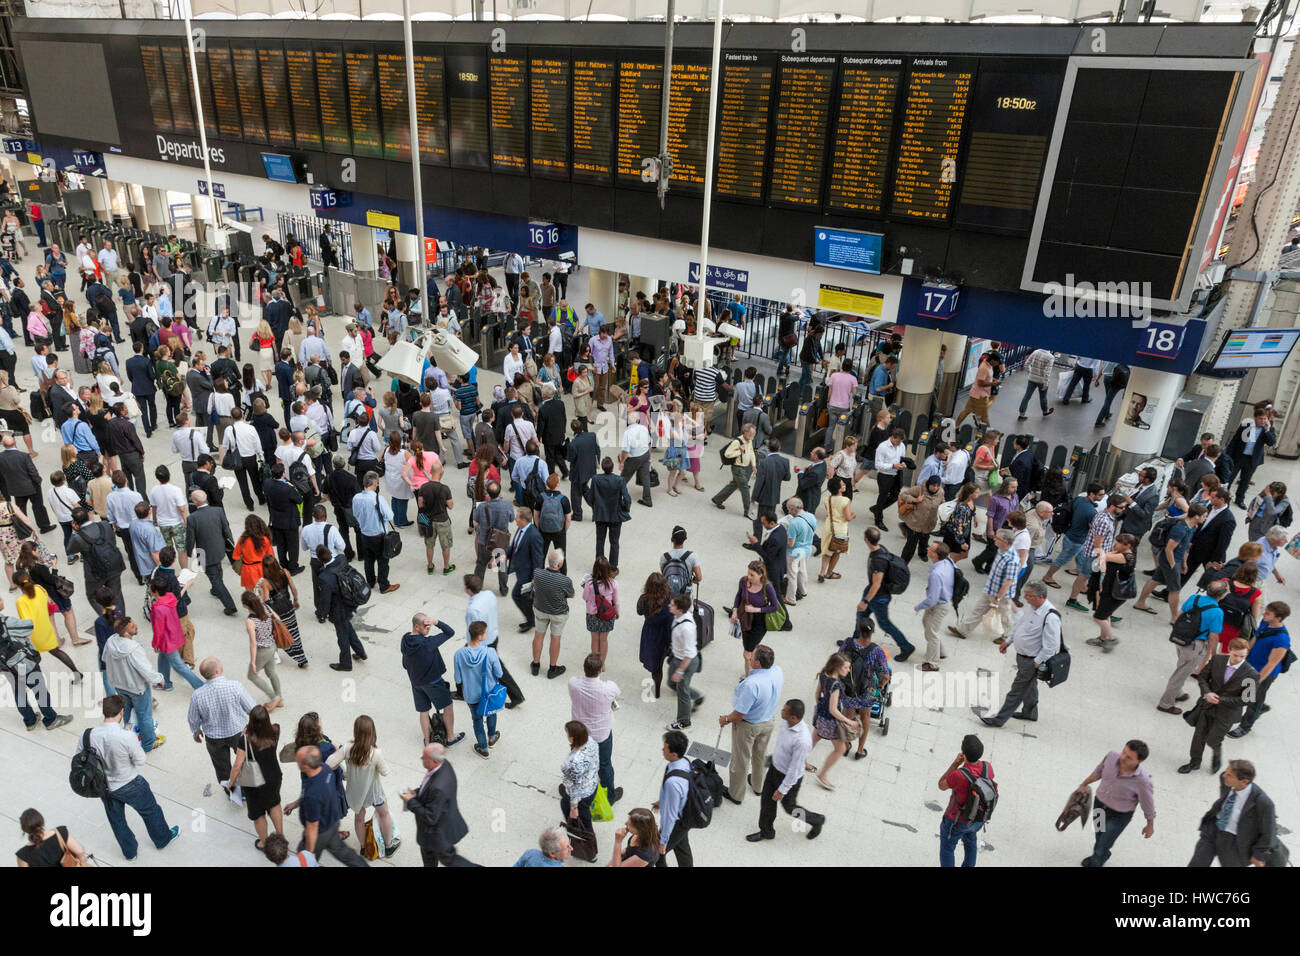 Crowds of passengers in front of the train departure board at Waterloo Railway Station, London, England, UK Stock Photo